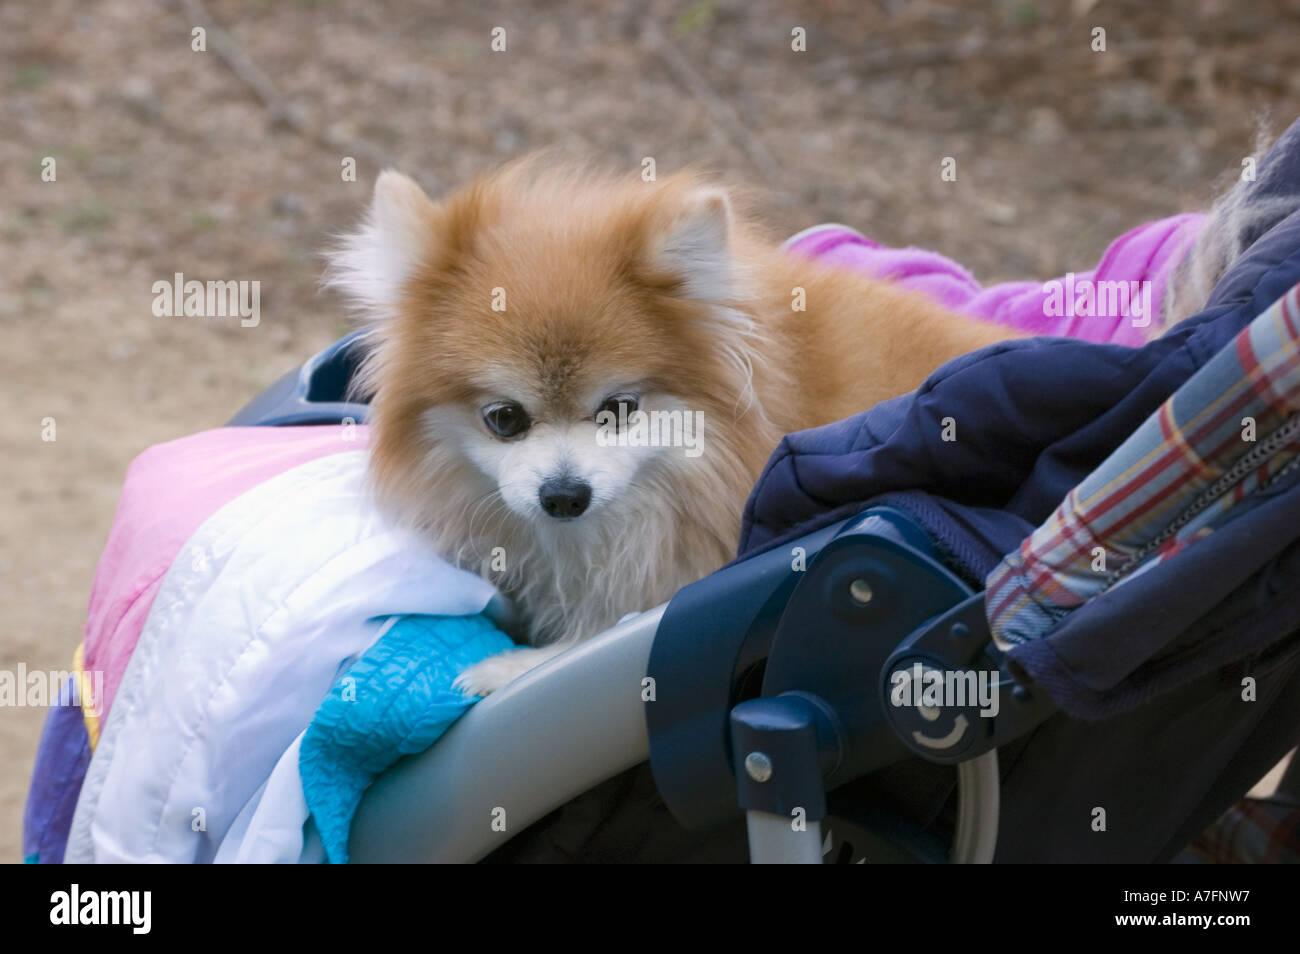 Dog being pushed in baby stroller Stock Photo